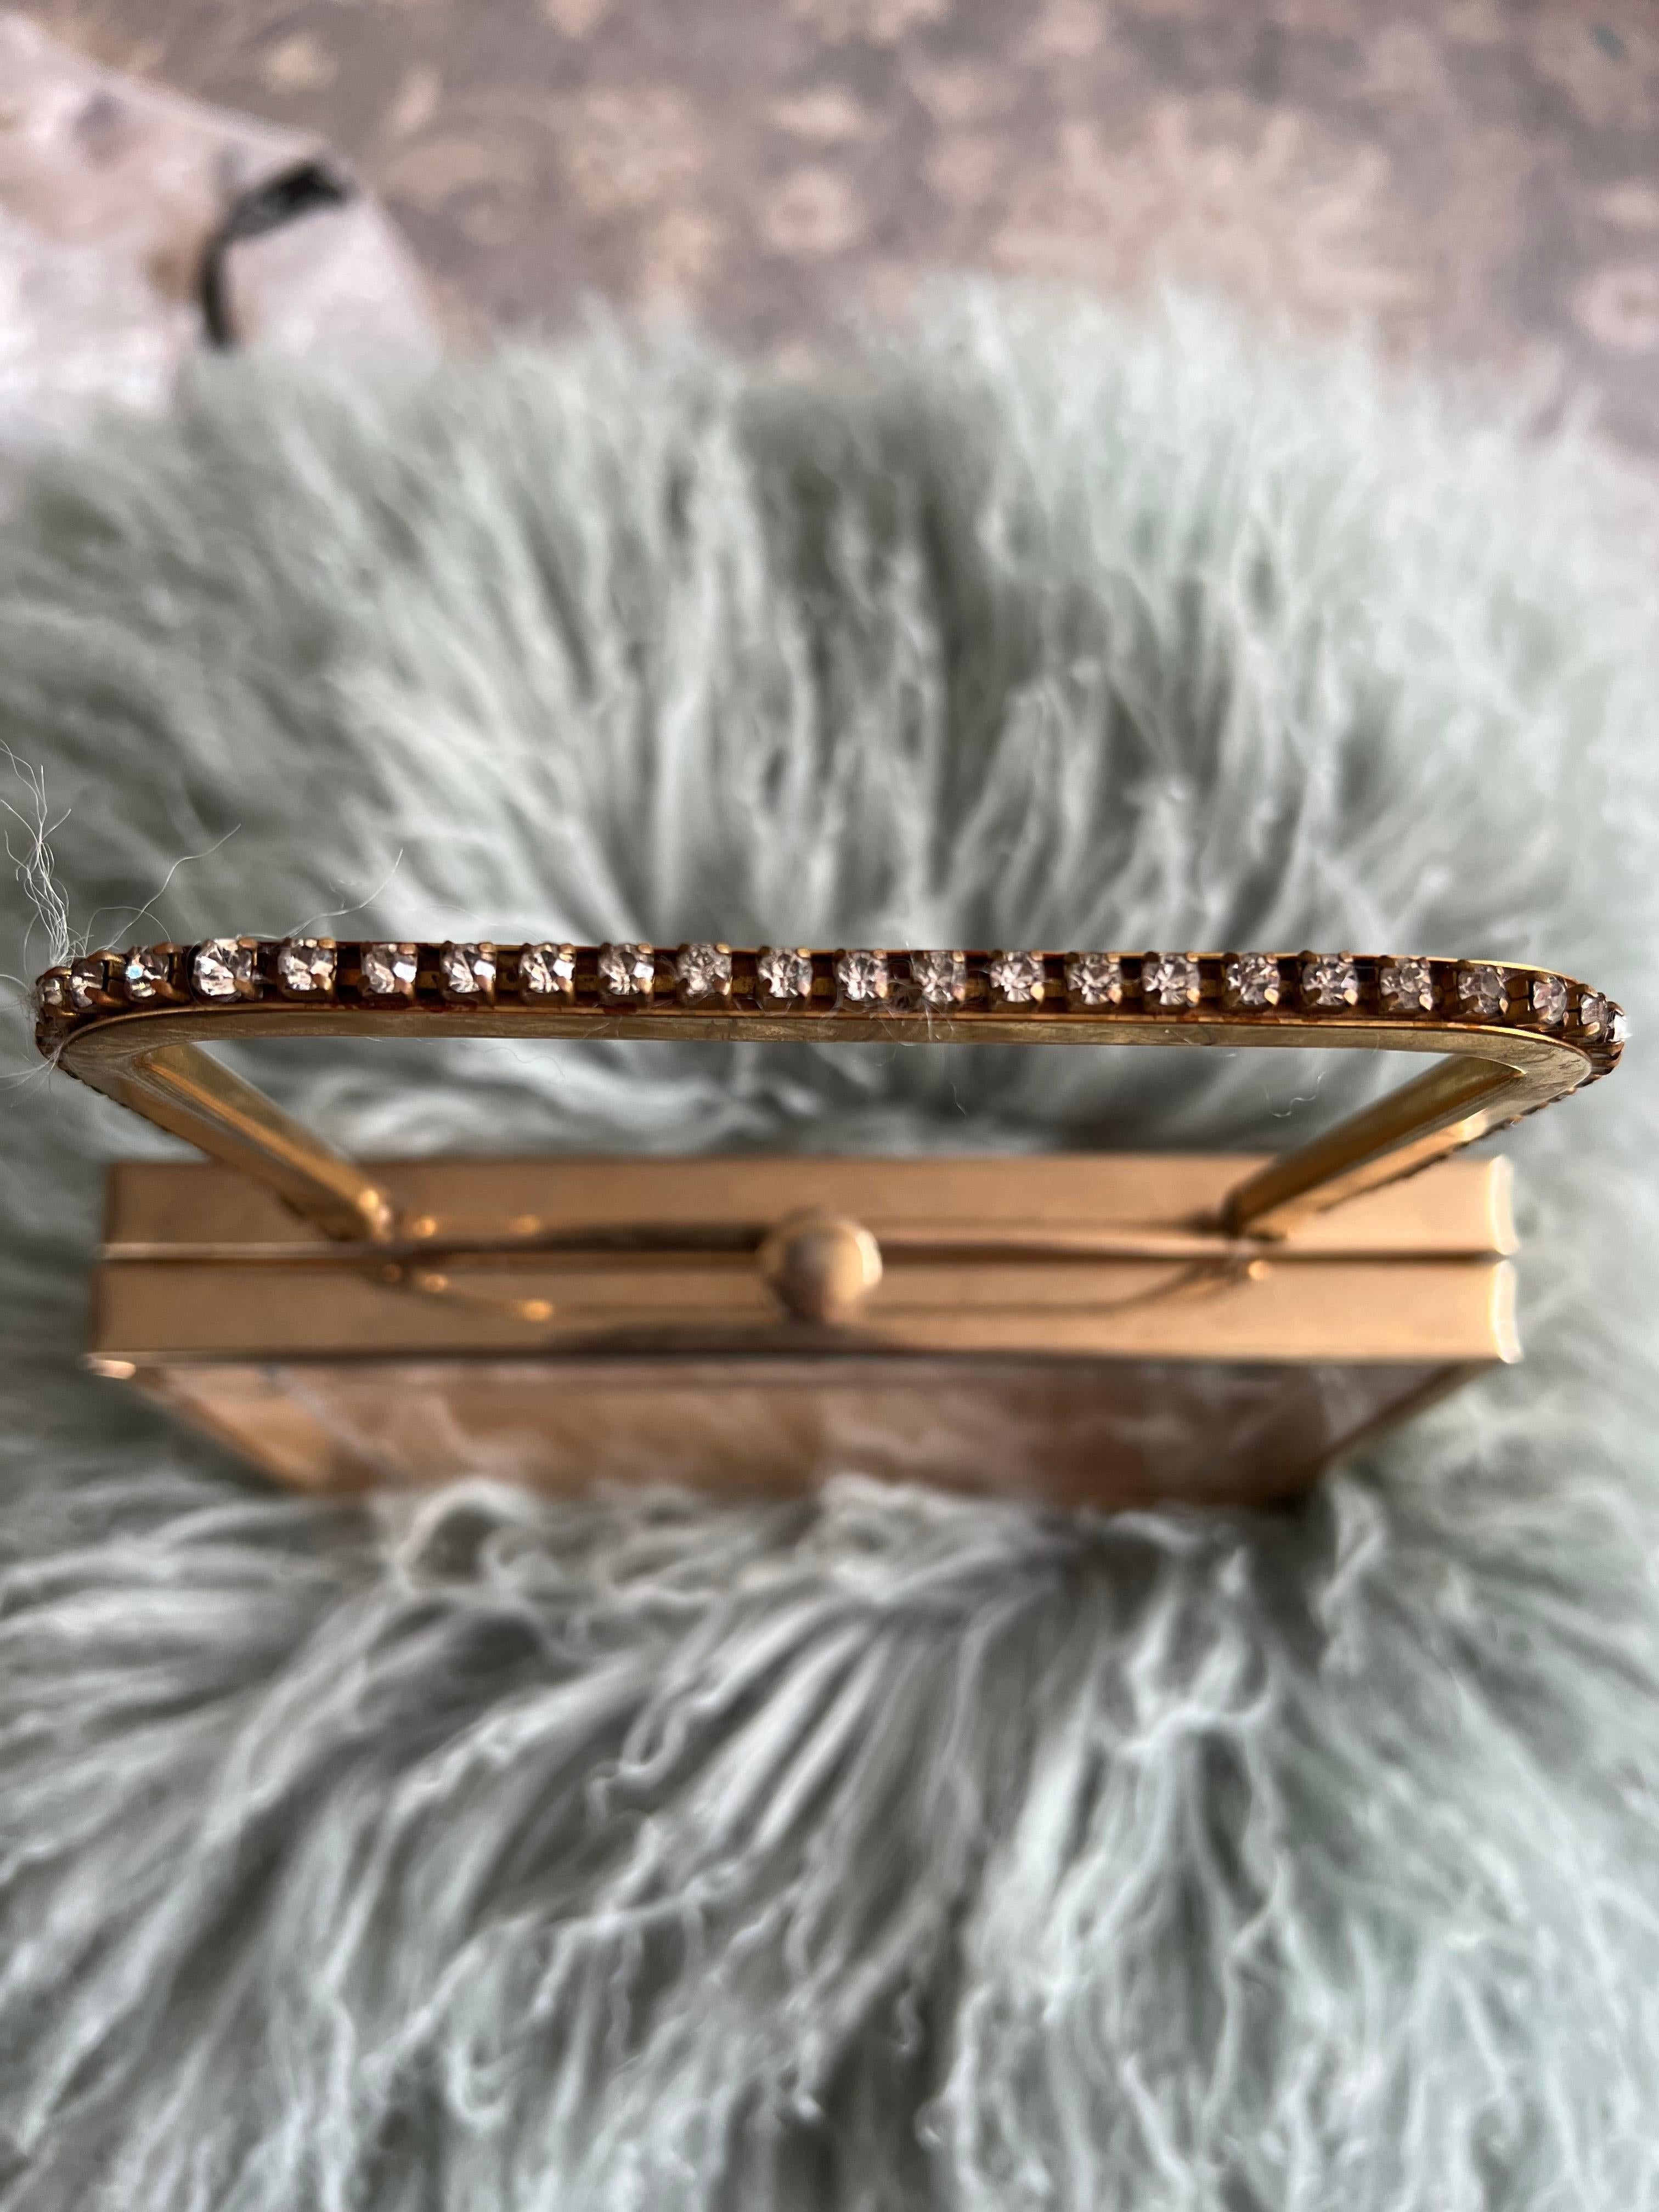 lucite clutch flyover New York with crystals 
Grace Kelly style. 
This is a rare lucite bag/clutch in mint condition. 
Embellished with crystals on the handles. 
Part of the New York 1950s flyover collection. 
More Elegant, Chic and Rare today. 
Can